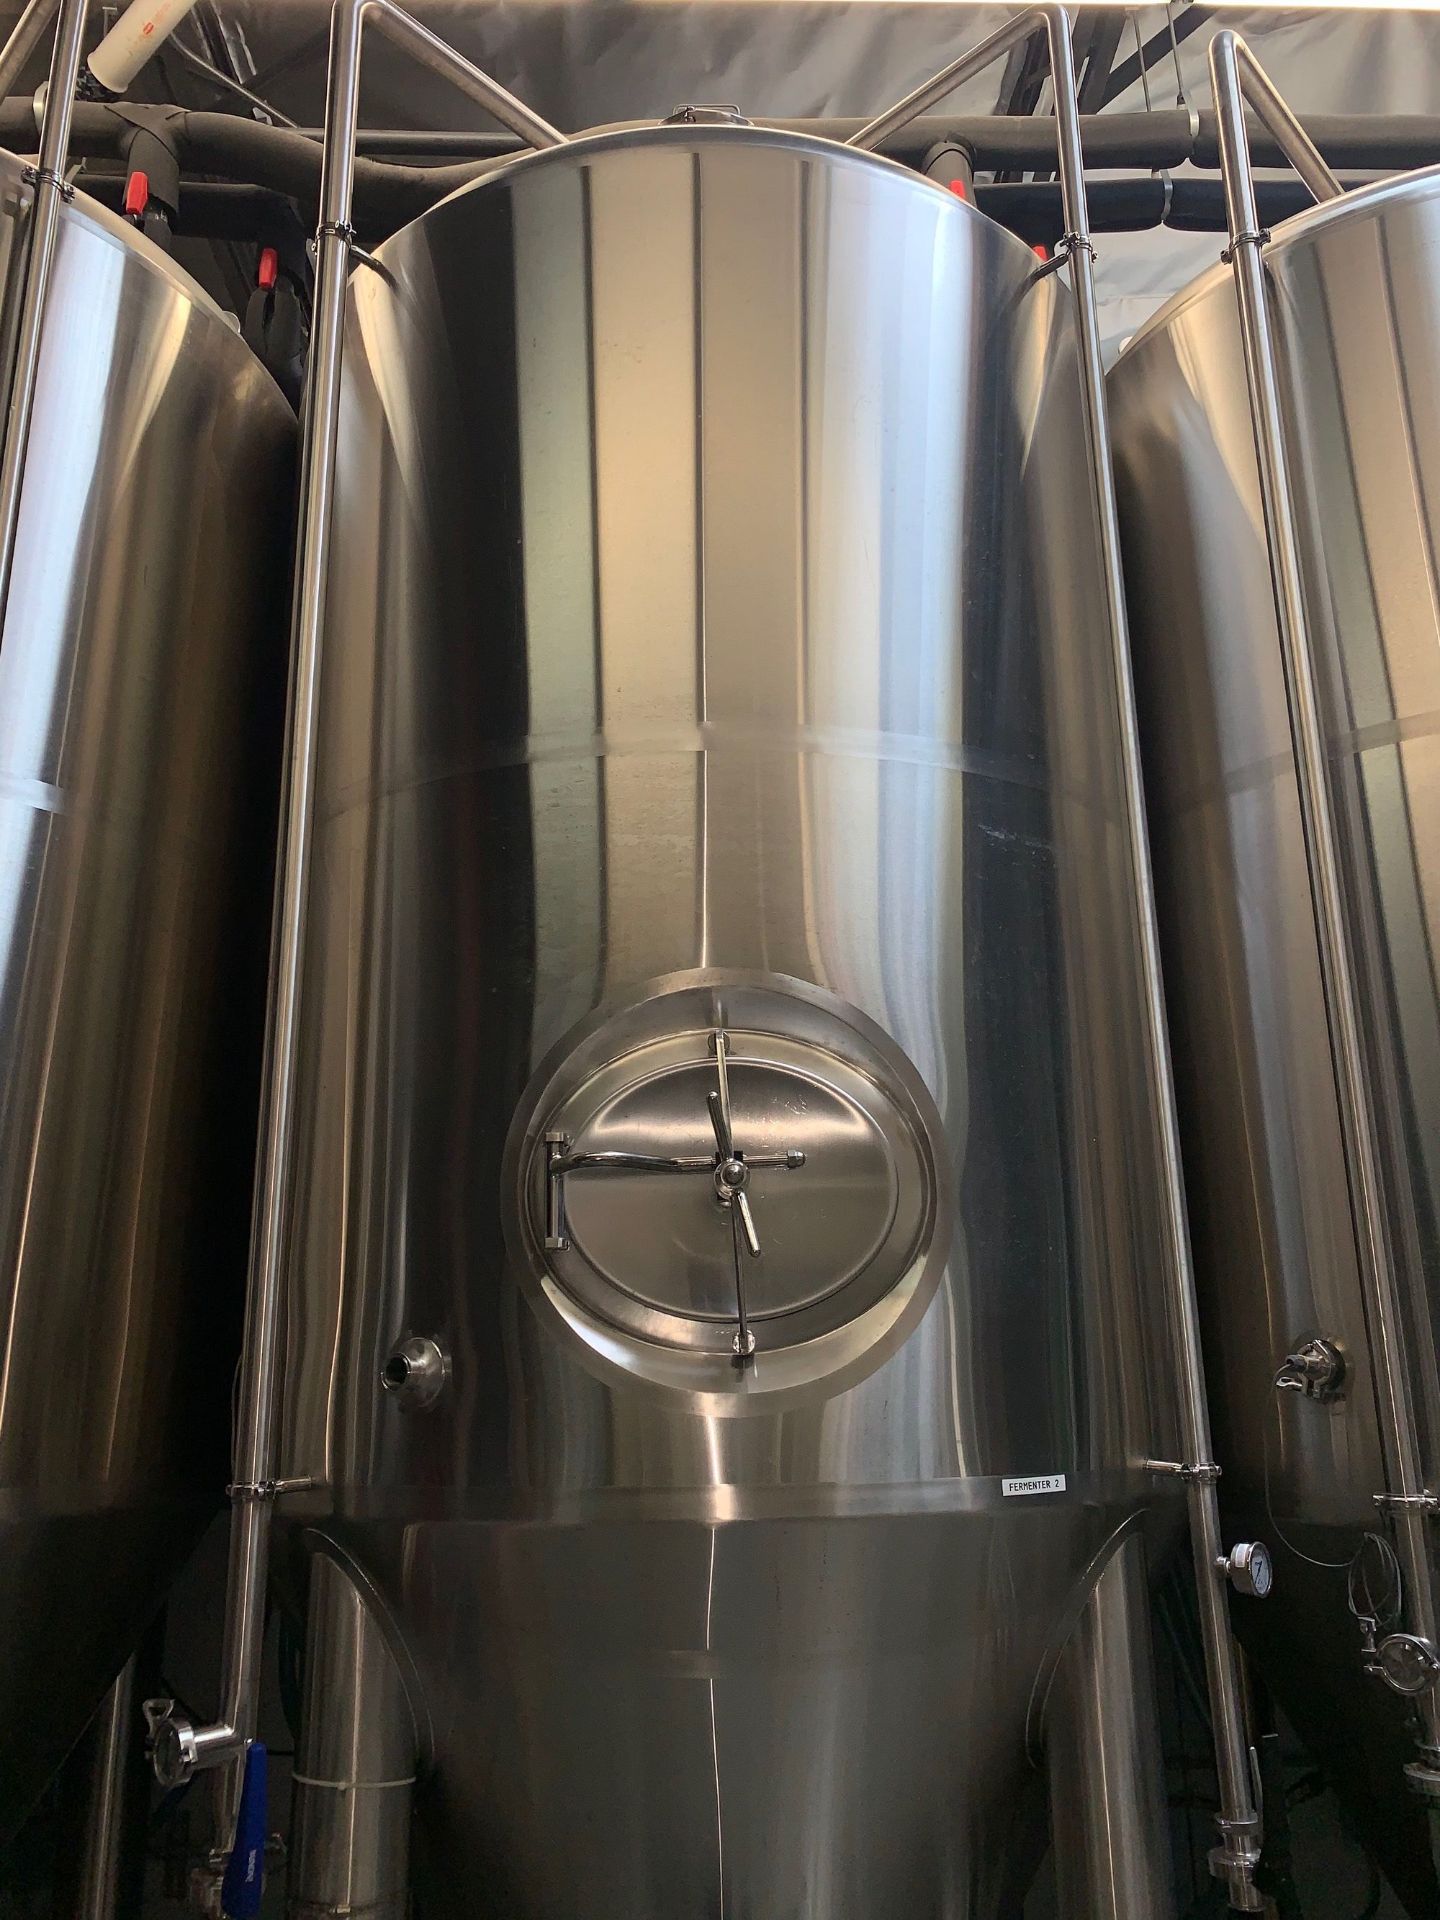 2019 Premier Stainless 30 BBL Unitank Fermenter, Glycol Jacketed, Ap | Subj to Bulk | Rig Fee: $1250 - Image 2 of 21